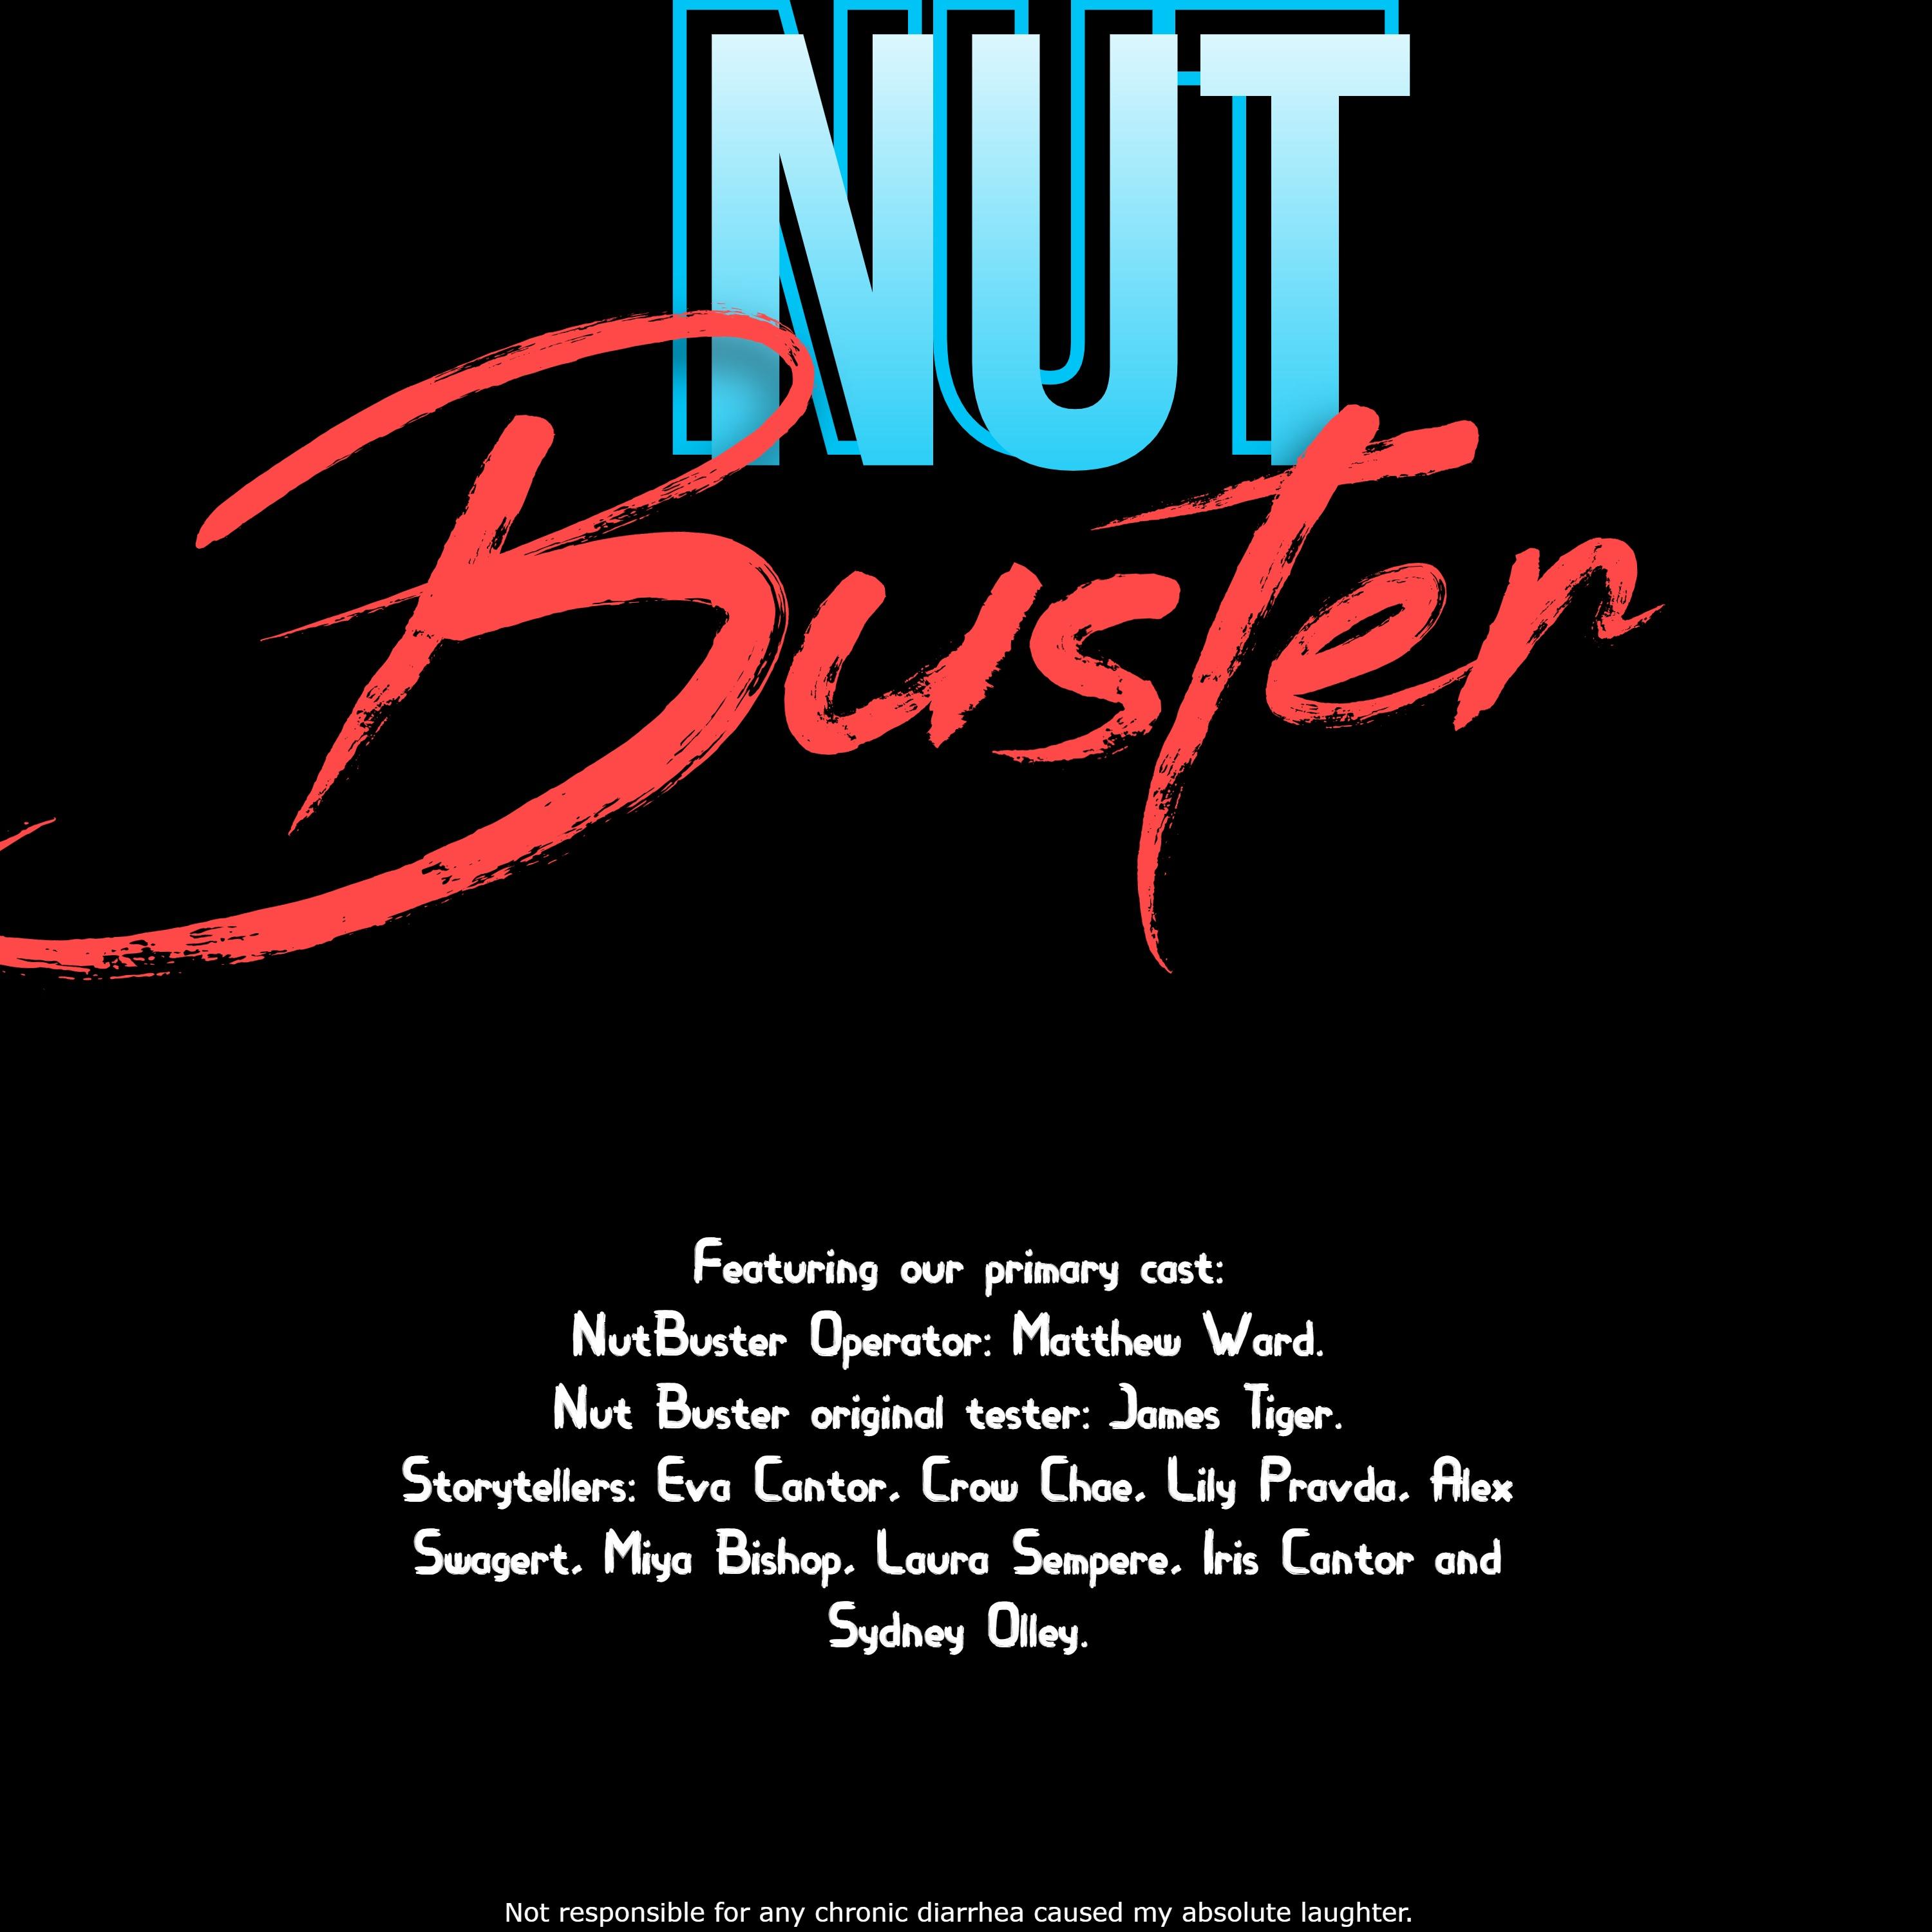 Nut Buster